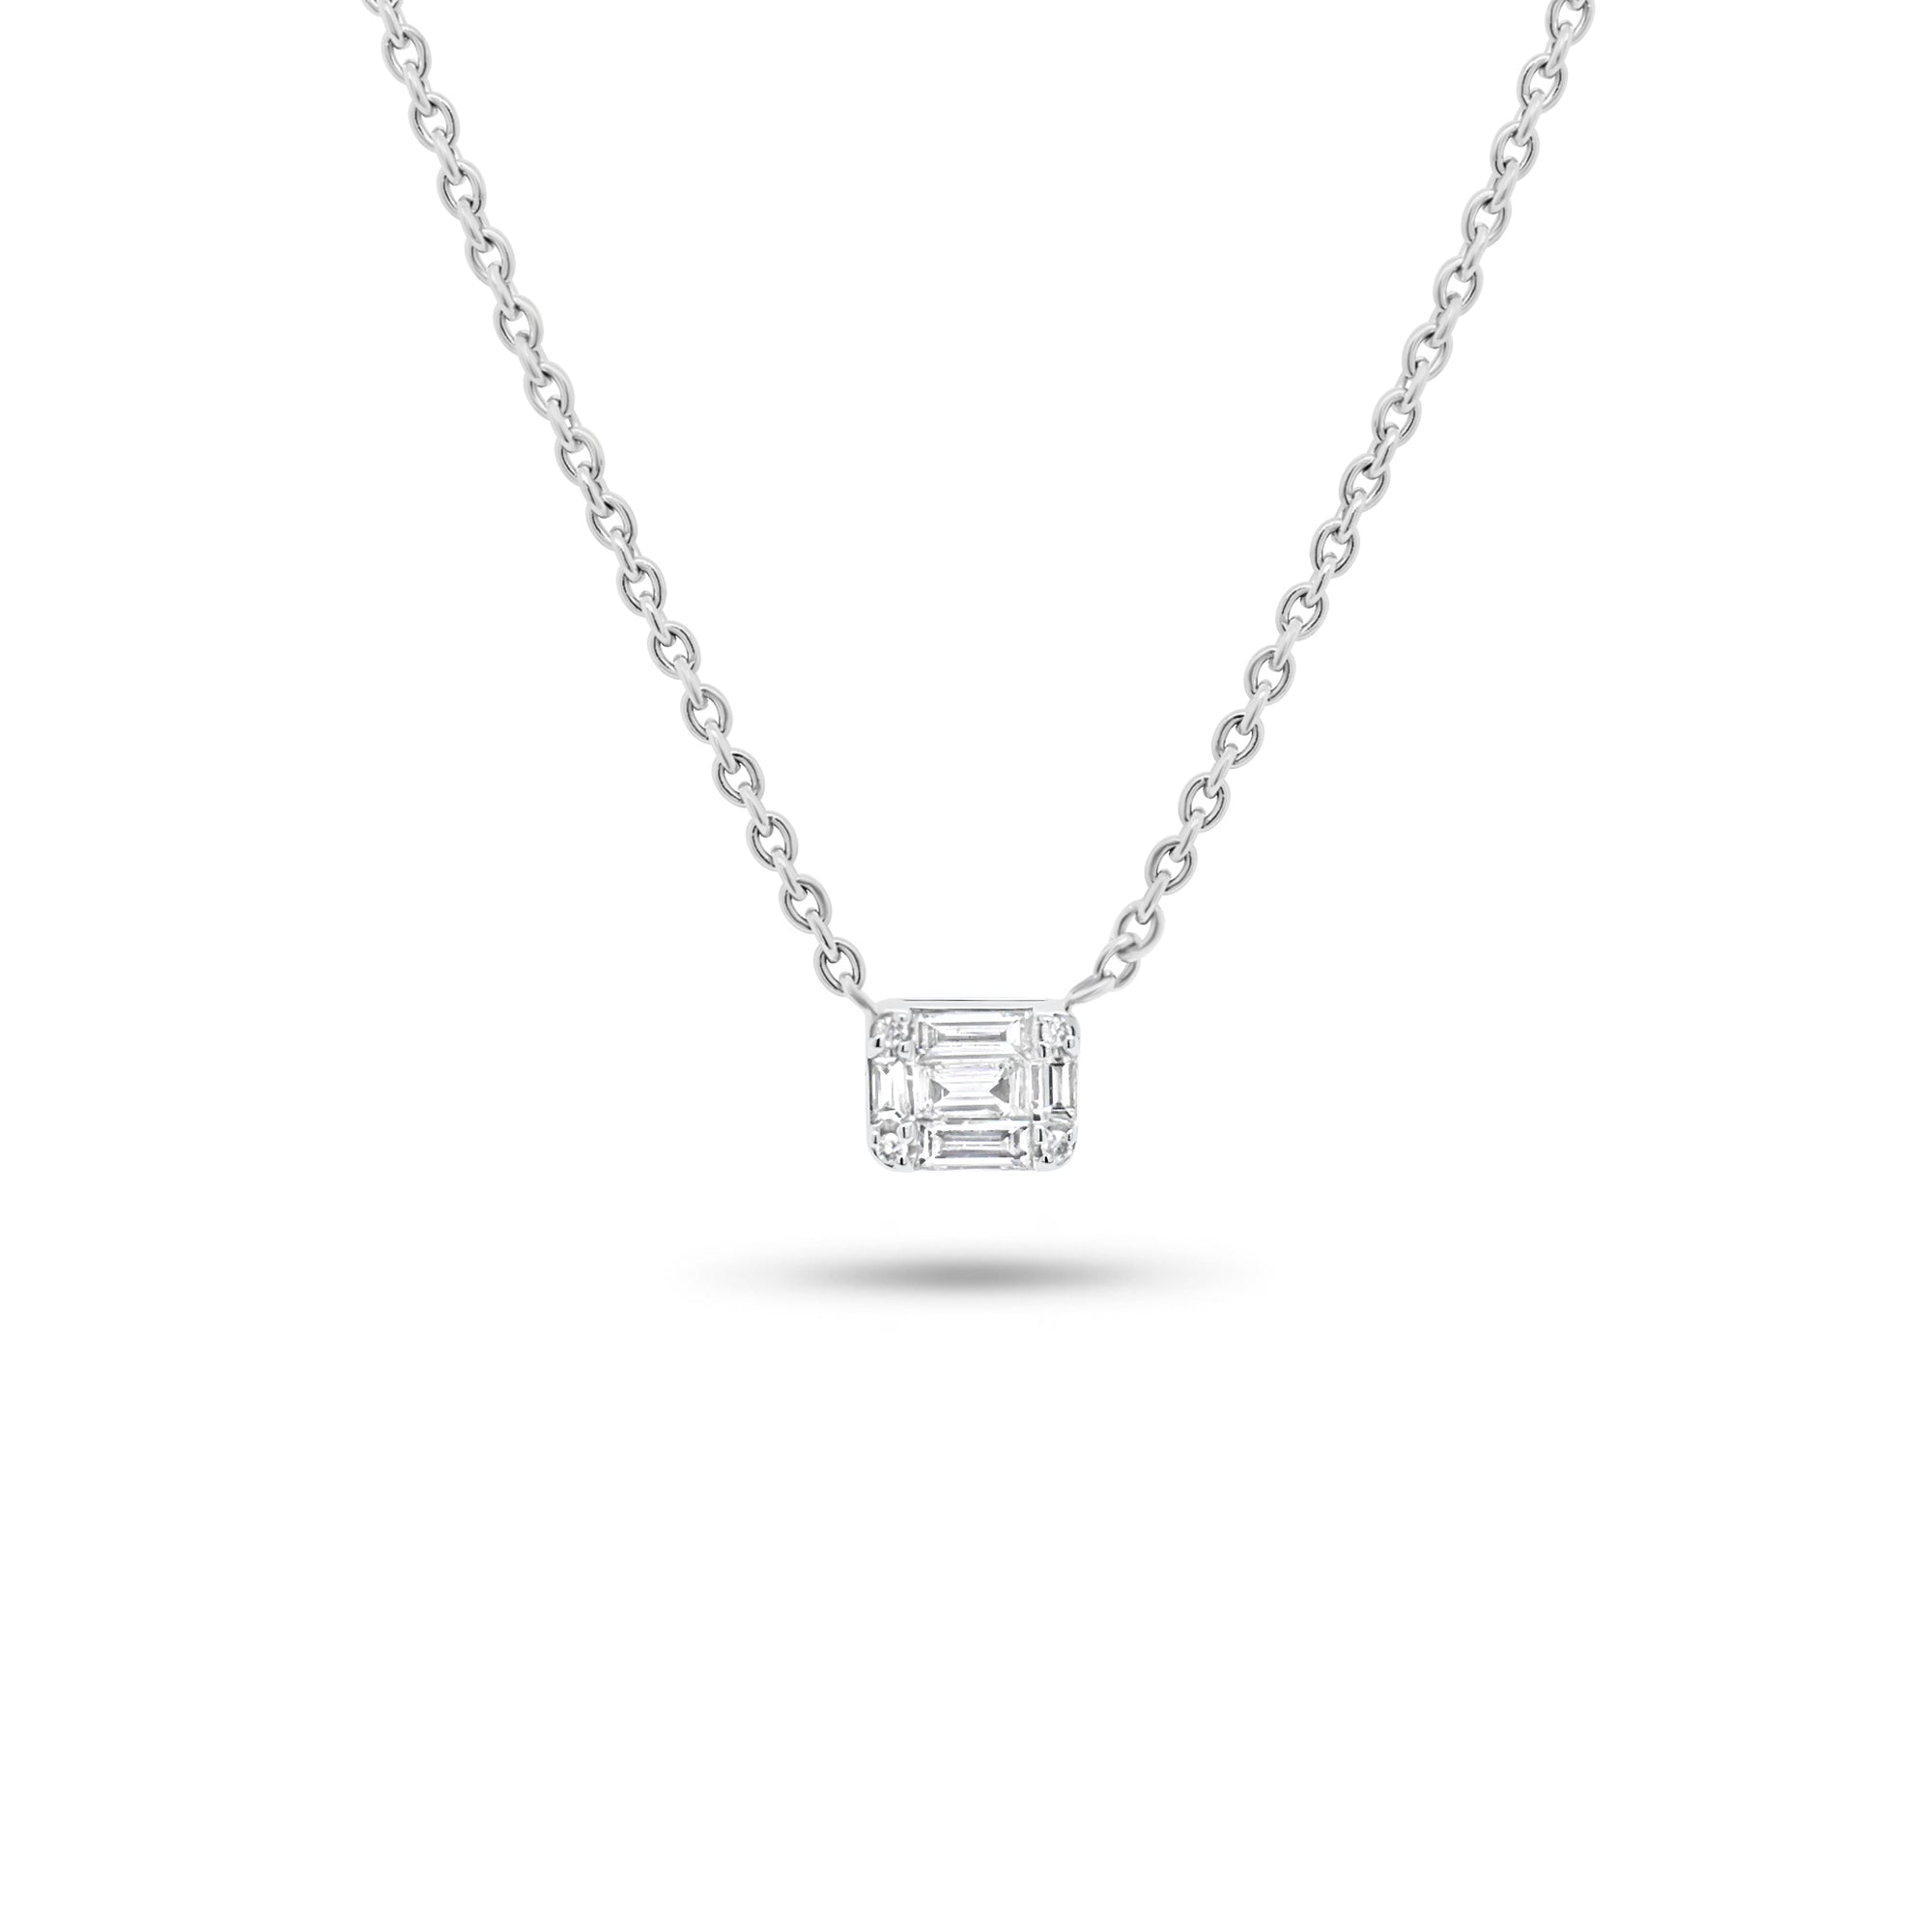 Emerald Illusion Pendant Necklace - 14K white gold weighing 2.24 grams - 4 round diamonds weighing 0.01 carats - 5 slim baguettes weighing 0.11 carats